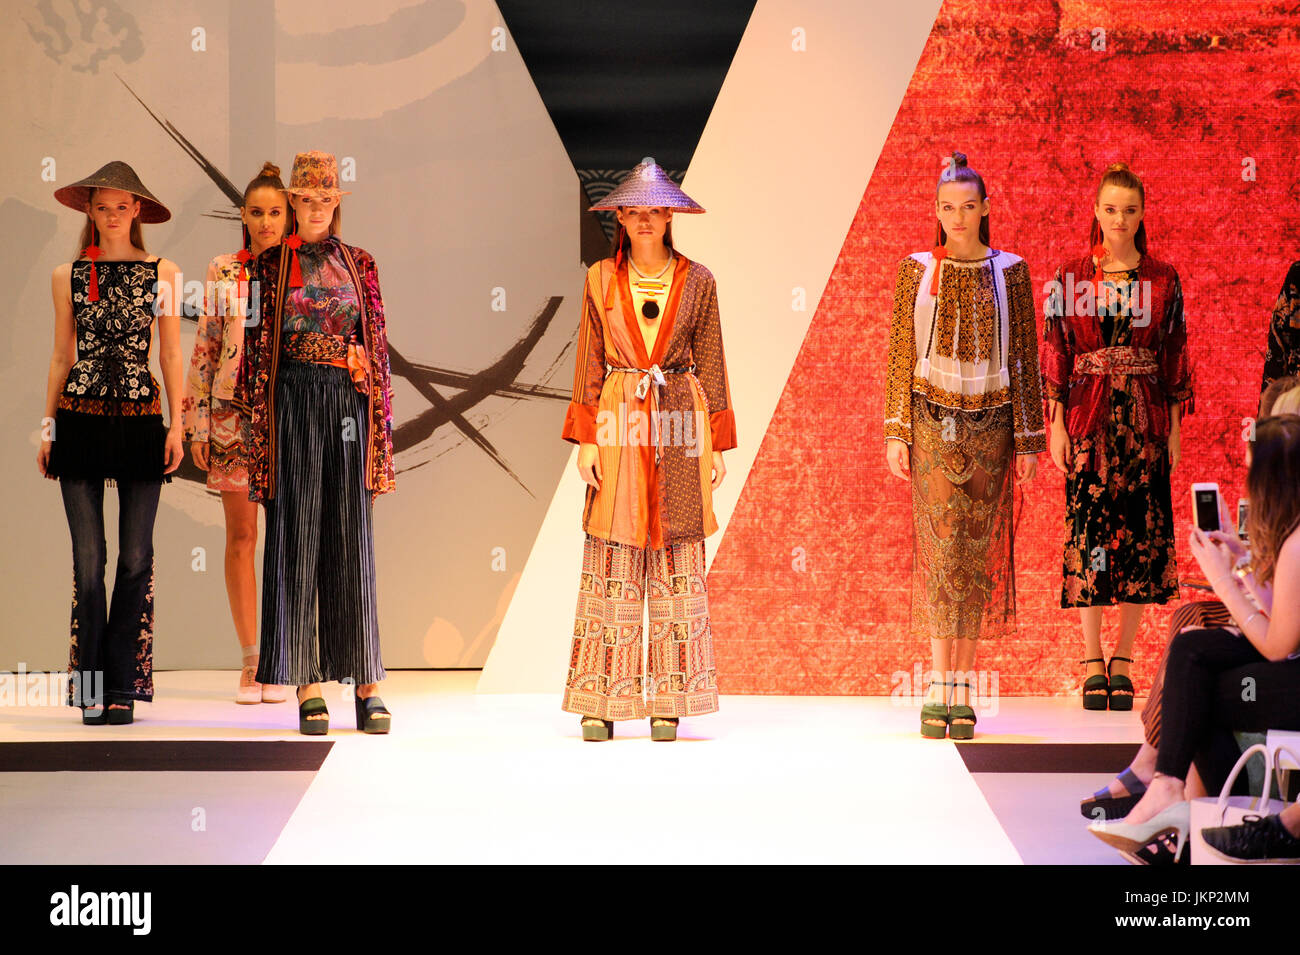 Models on the Oriental-themed Main Catwalk at Pure London, Olympia, London, UK. Pure London, the UK's leading trade fashion exhibition opens its doors 23-25th July 2017, featuring two halls of trade stands from leading fashion and accessories designers, lectures from industry experts, and fashion shows on two different catwalks throughout each day. Fashion buyers were out in force to see the new season's collections. 24th July 2017. Credit: Antony Nettle/Alamy Live News Stock Photo